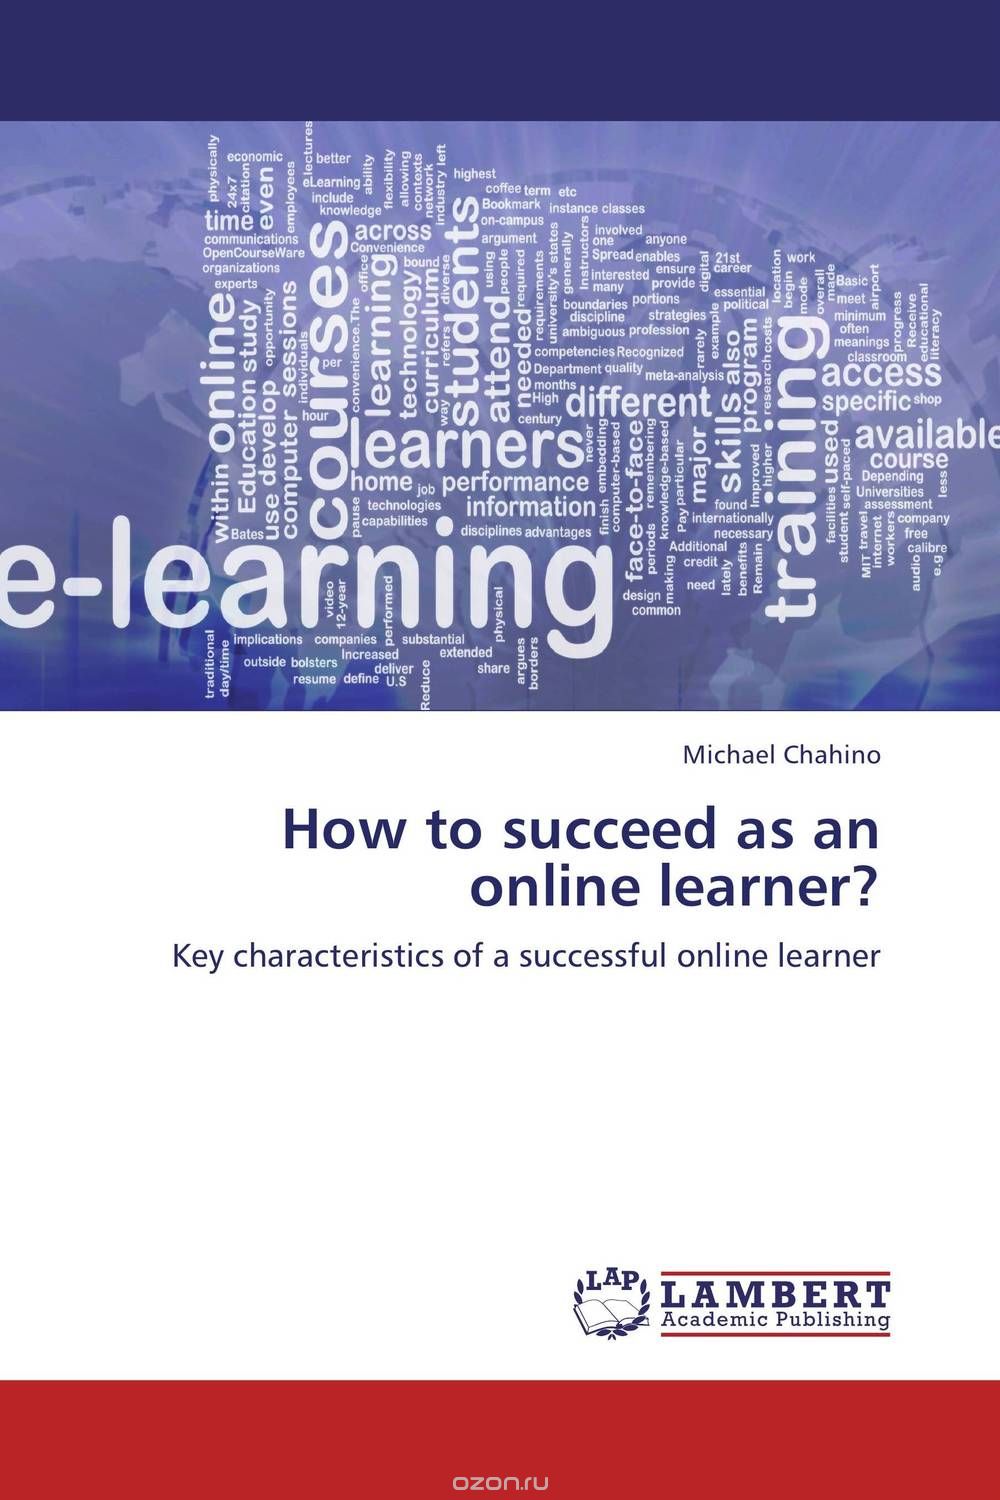 Скачать книгу "How to succeed as an online learner?"